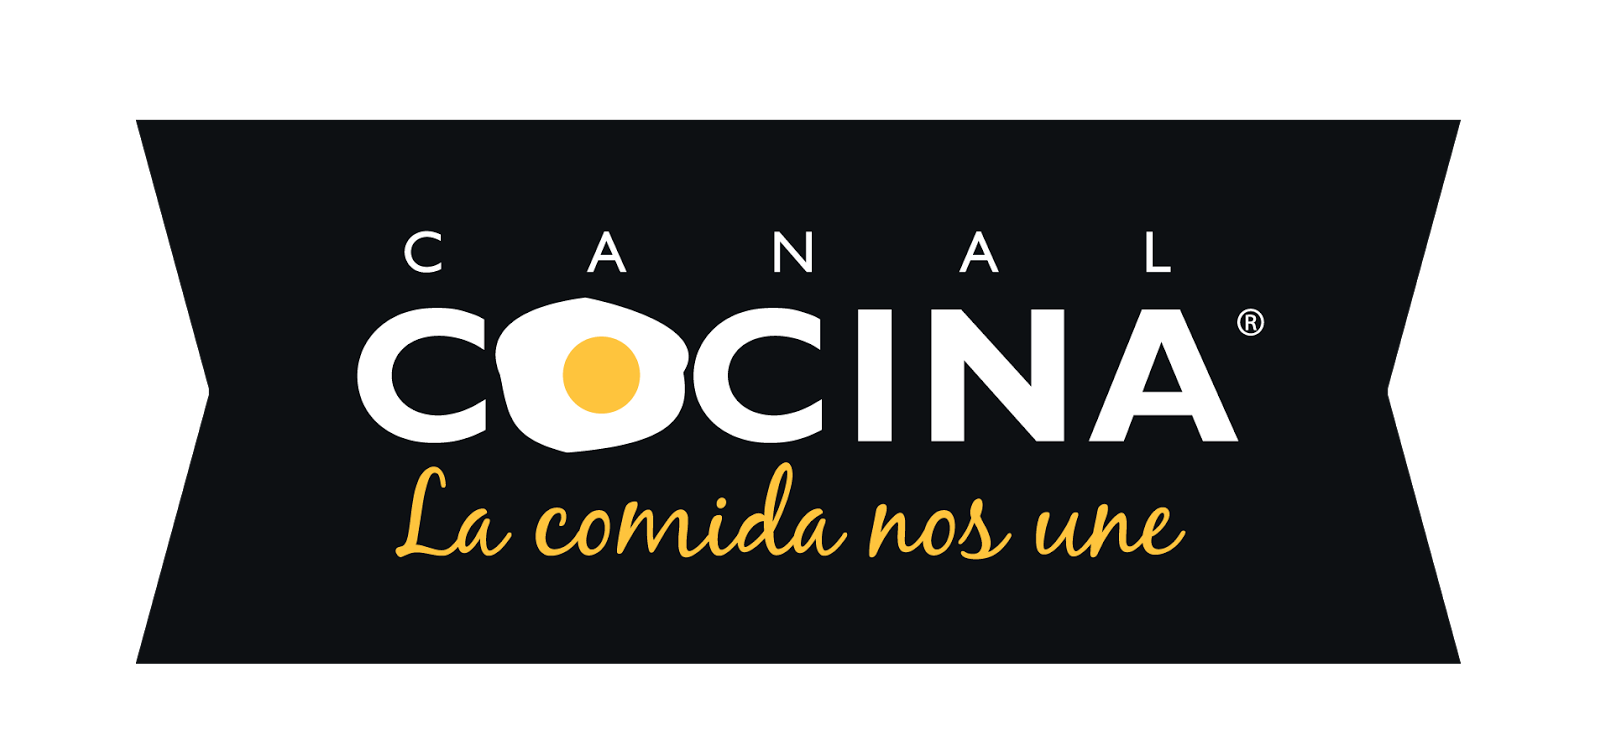 #GoogleGlass press release: Four great chefs will test cooking apps and be the first to use Canal Cocina Glass